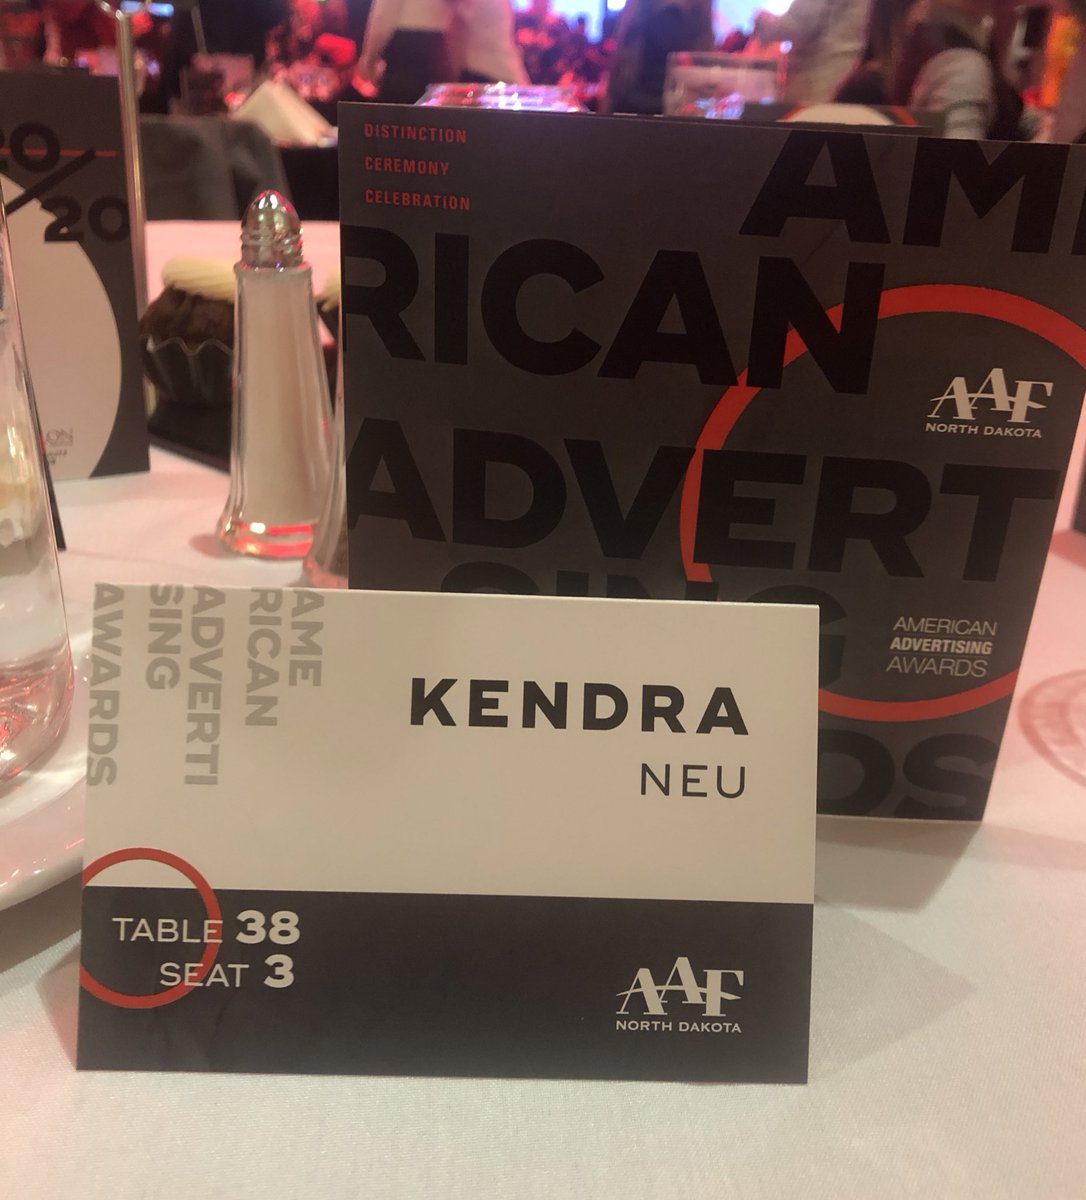 Excited to be represented among advertising professionals in ND! #addyawards @AAFND